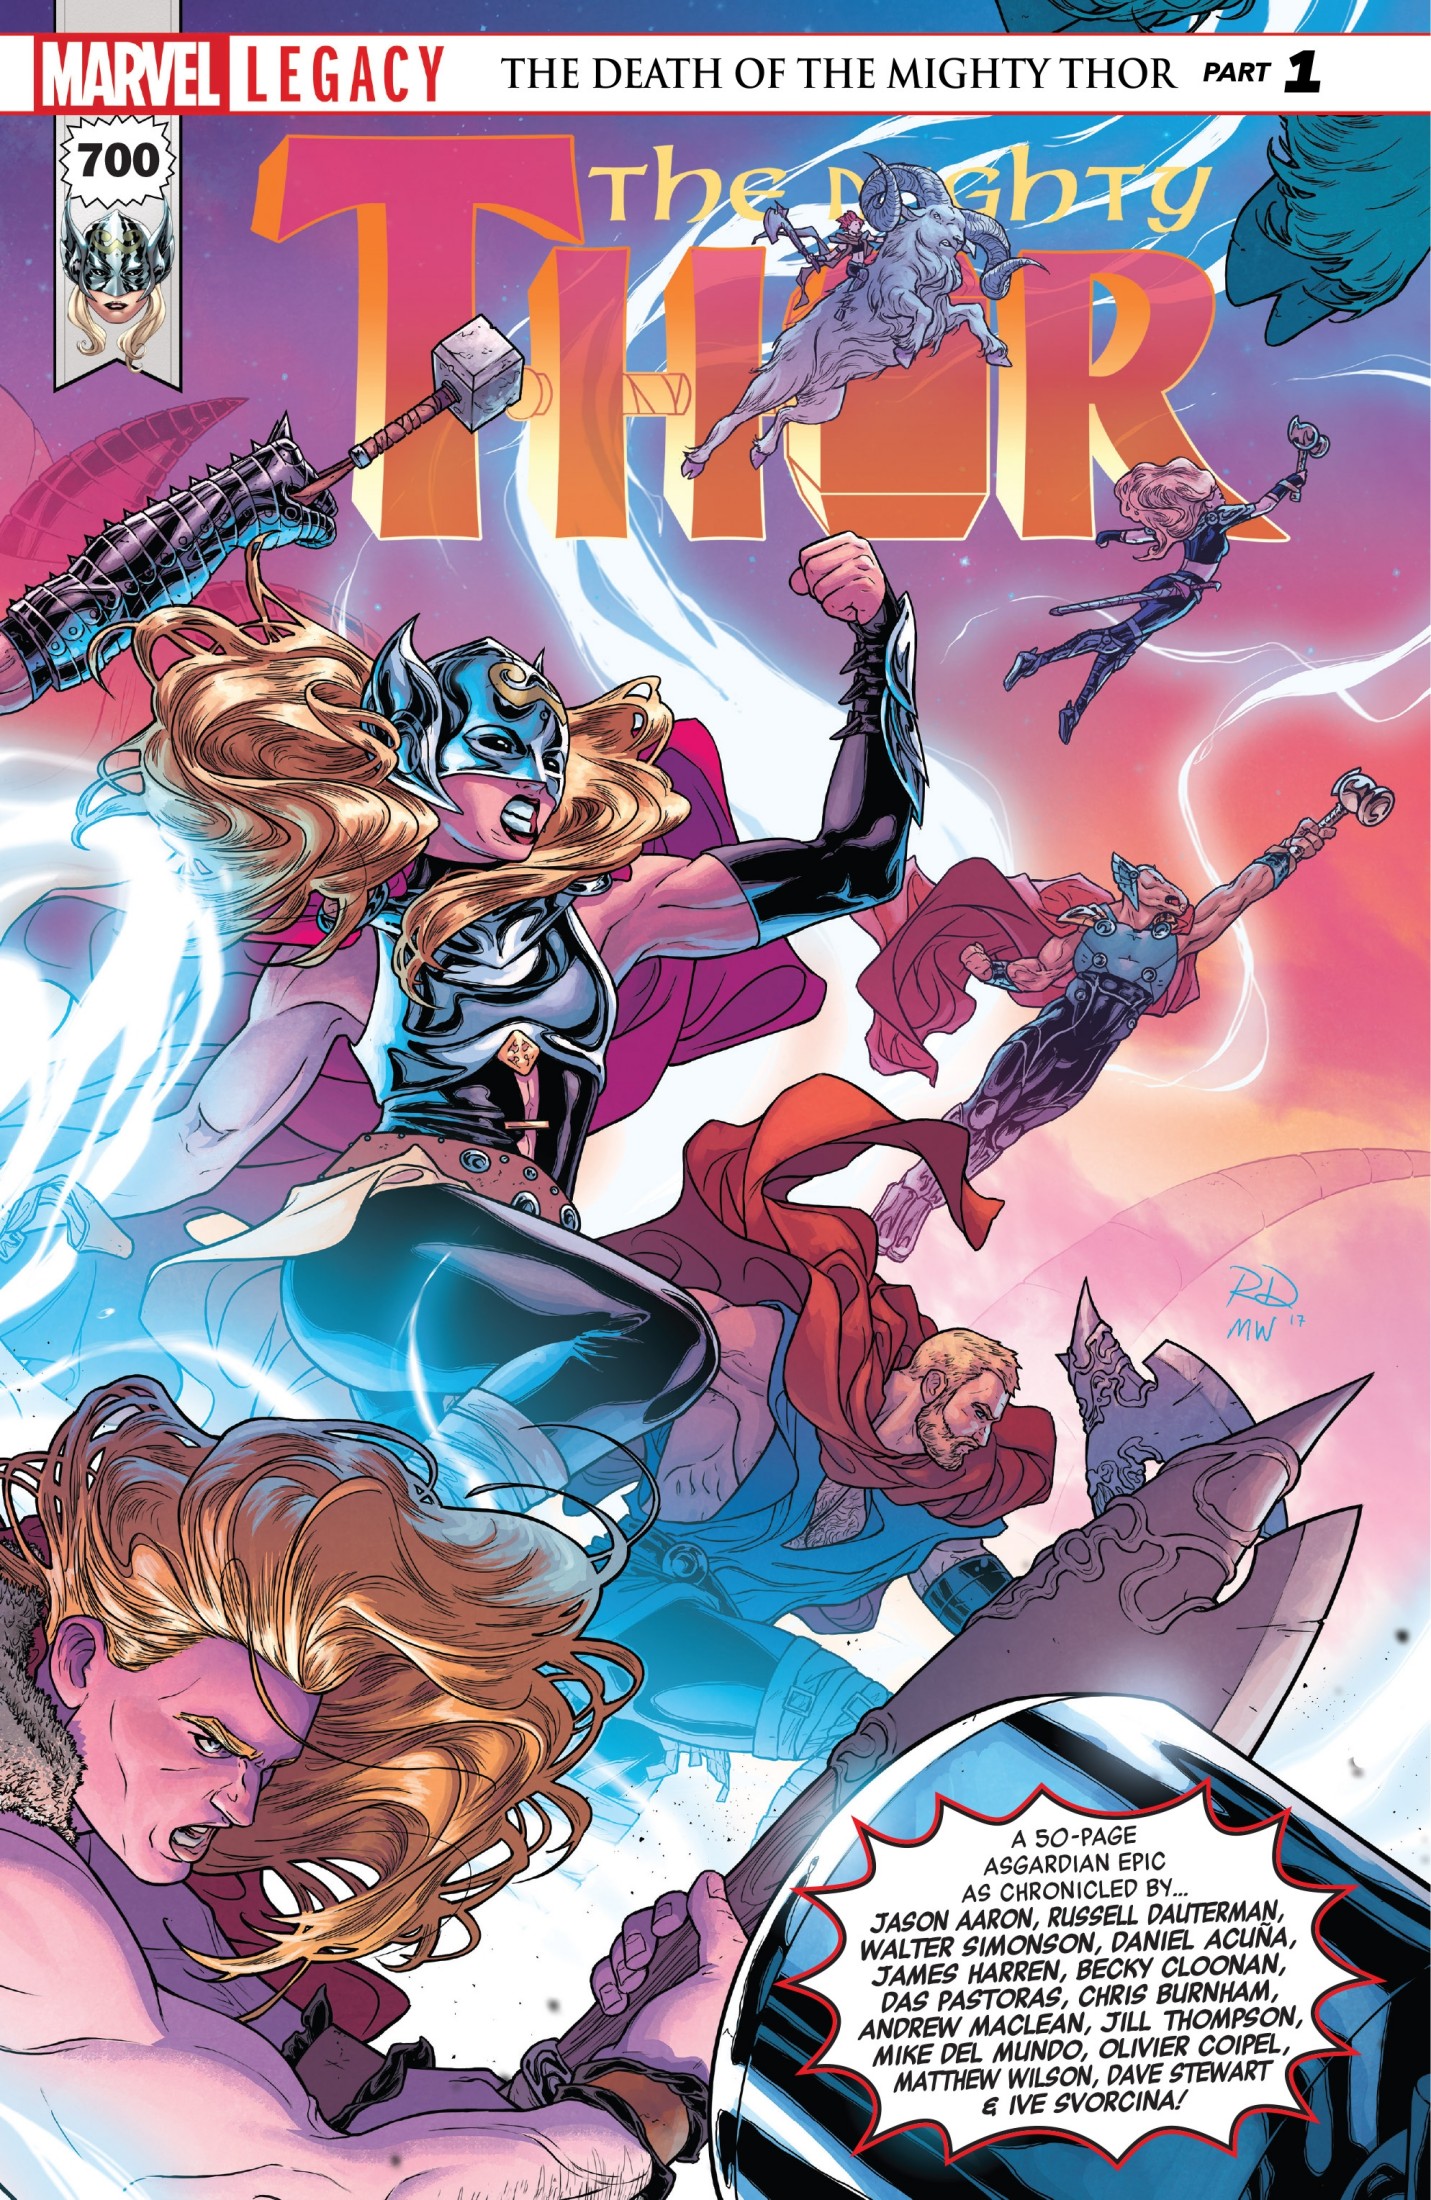 The Death of the Mighty Thor Part 1 The Blood of the Norns; -- Adam Hughes (cover), Andrew MacLean (artist), Becky Cloonan -- Mighty Thor, Volume 3, -- 1e1d28570cc39398908c88a49f2b5eb2 -- Anna’s Archive